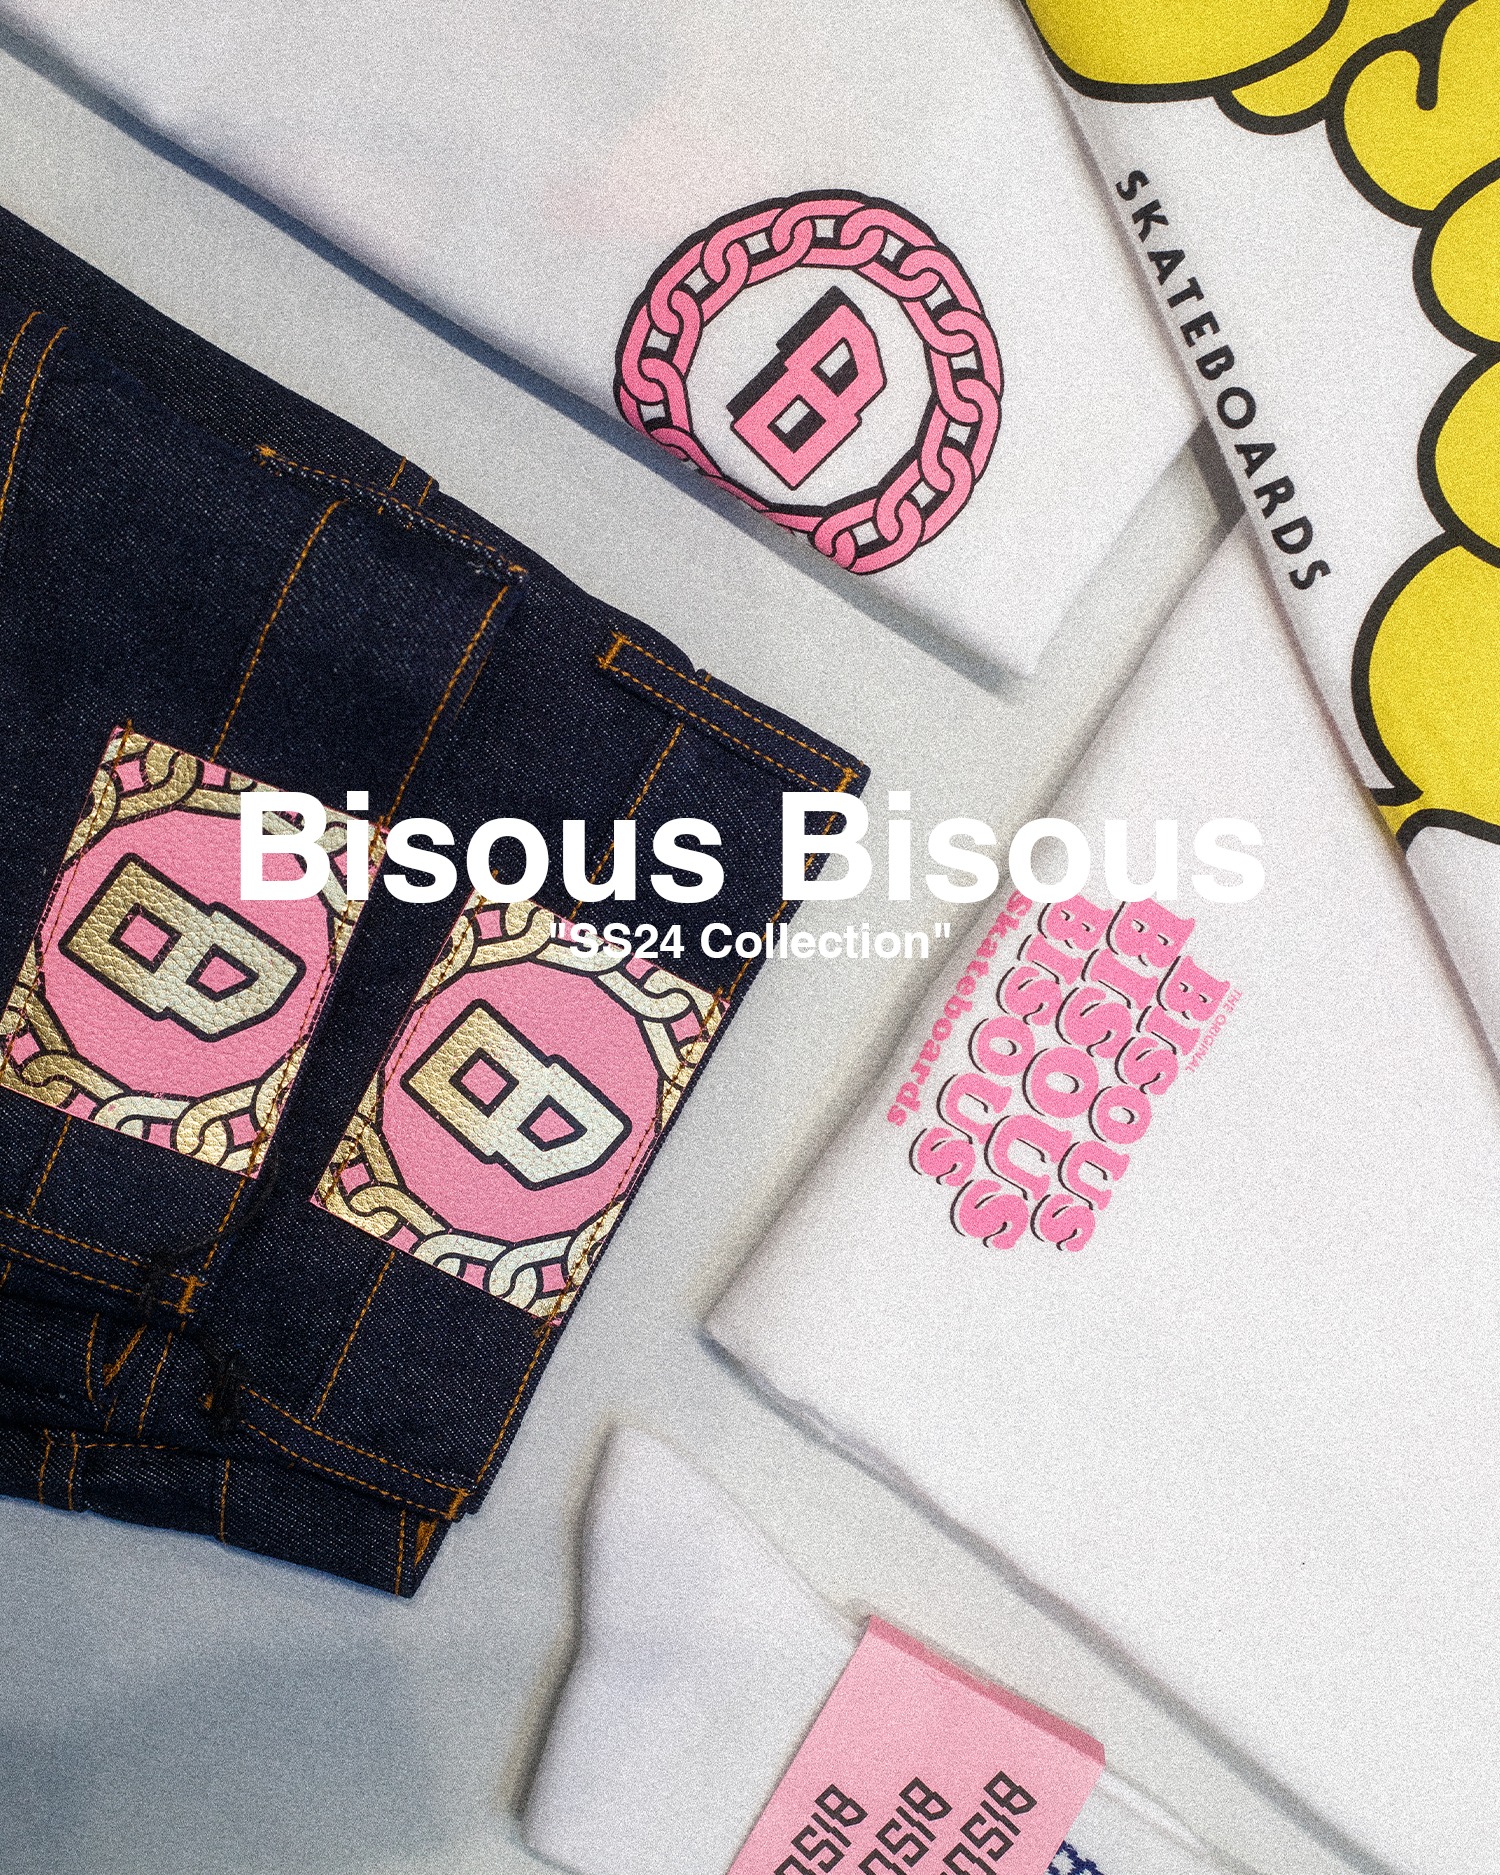 bisous bisous ss24 collection fp